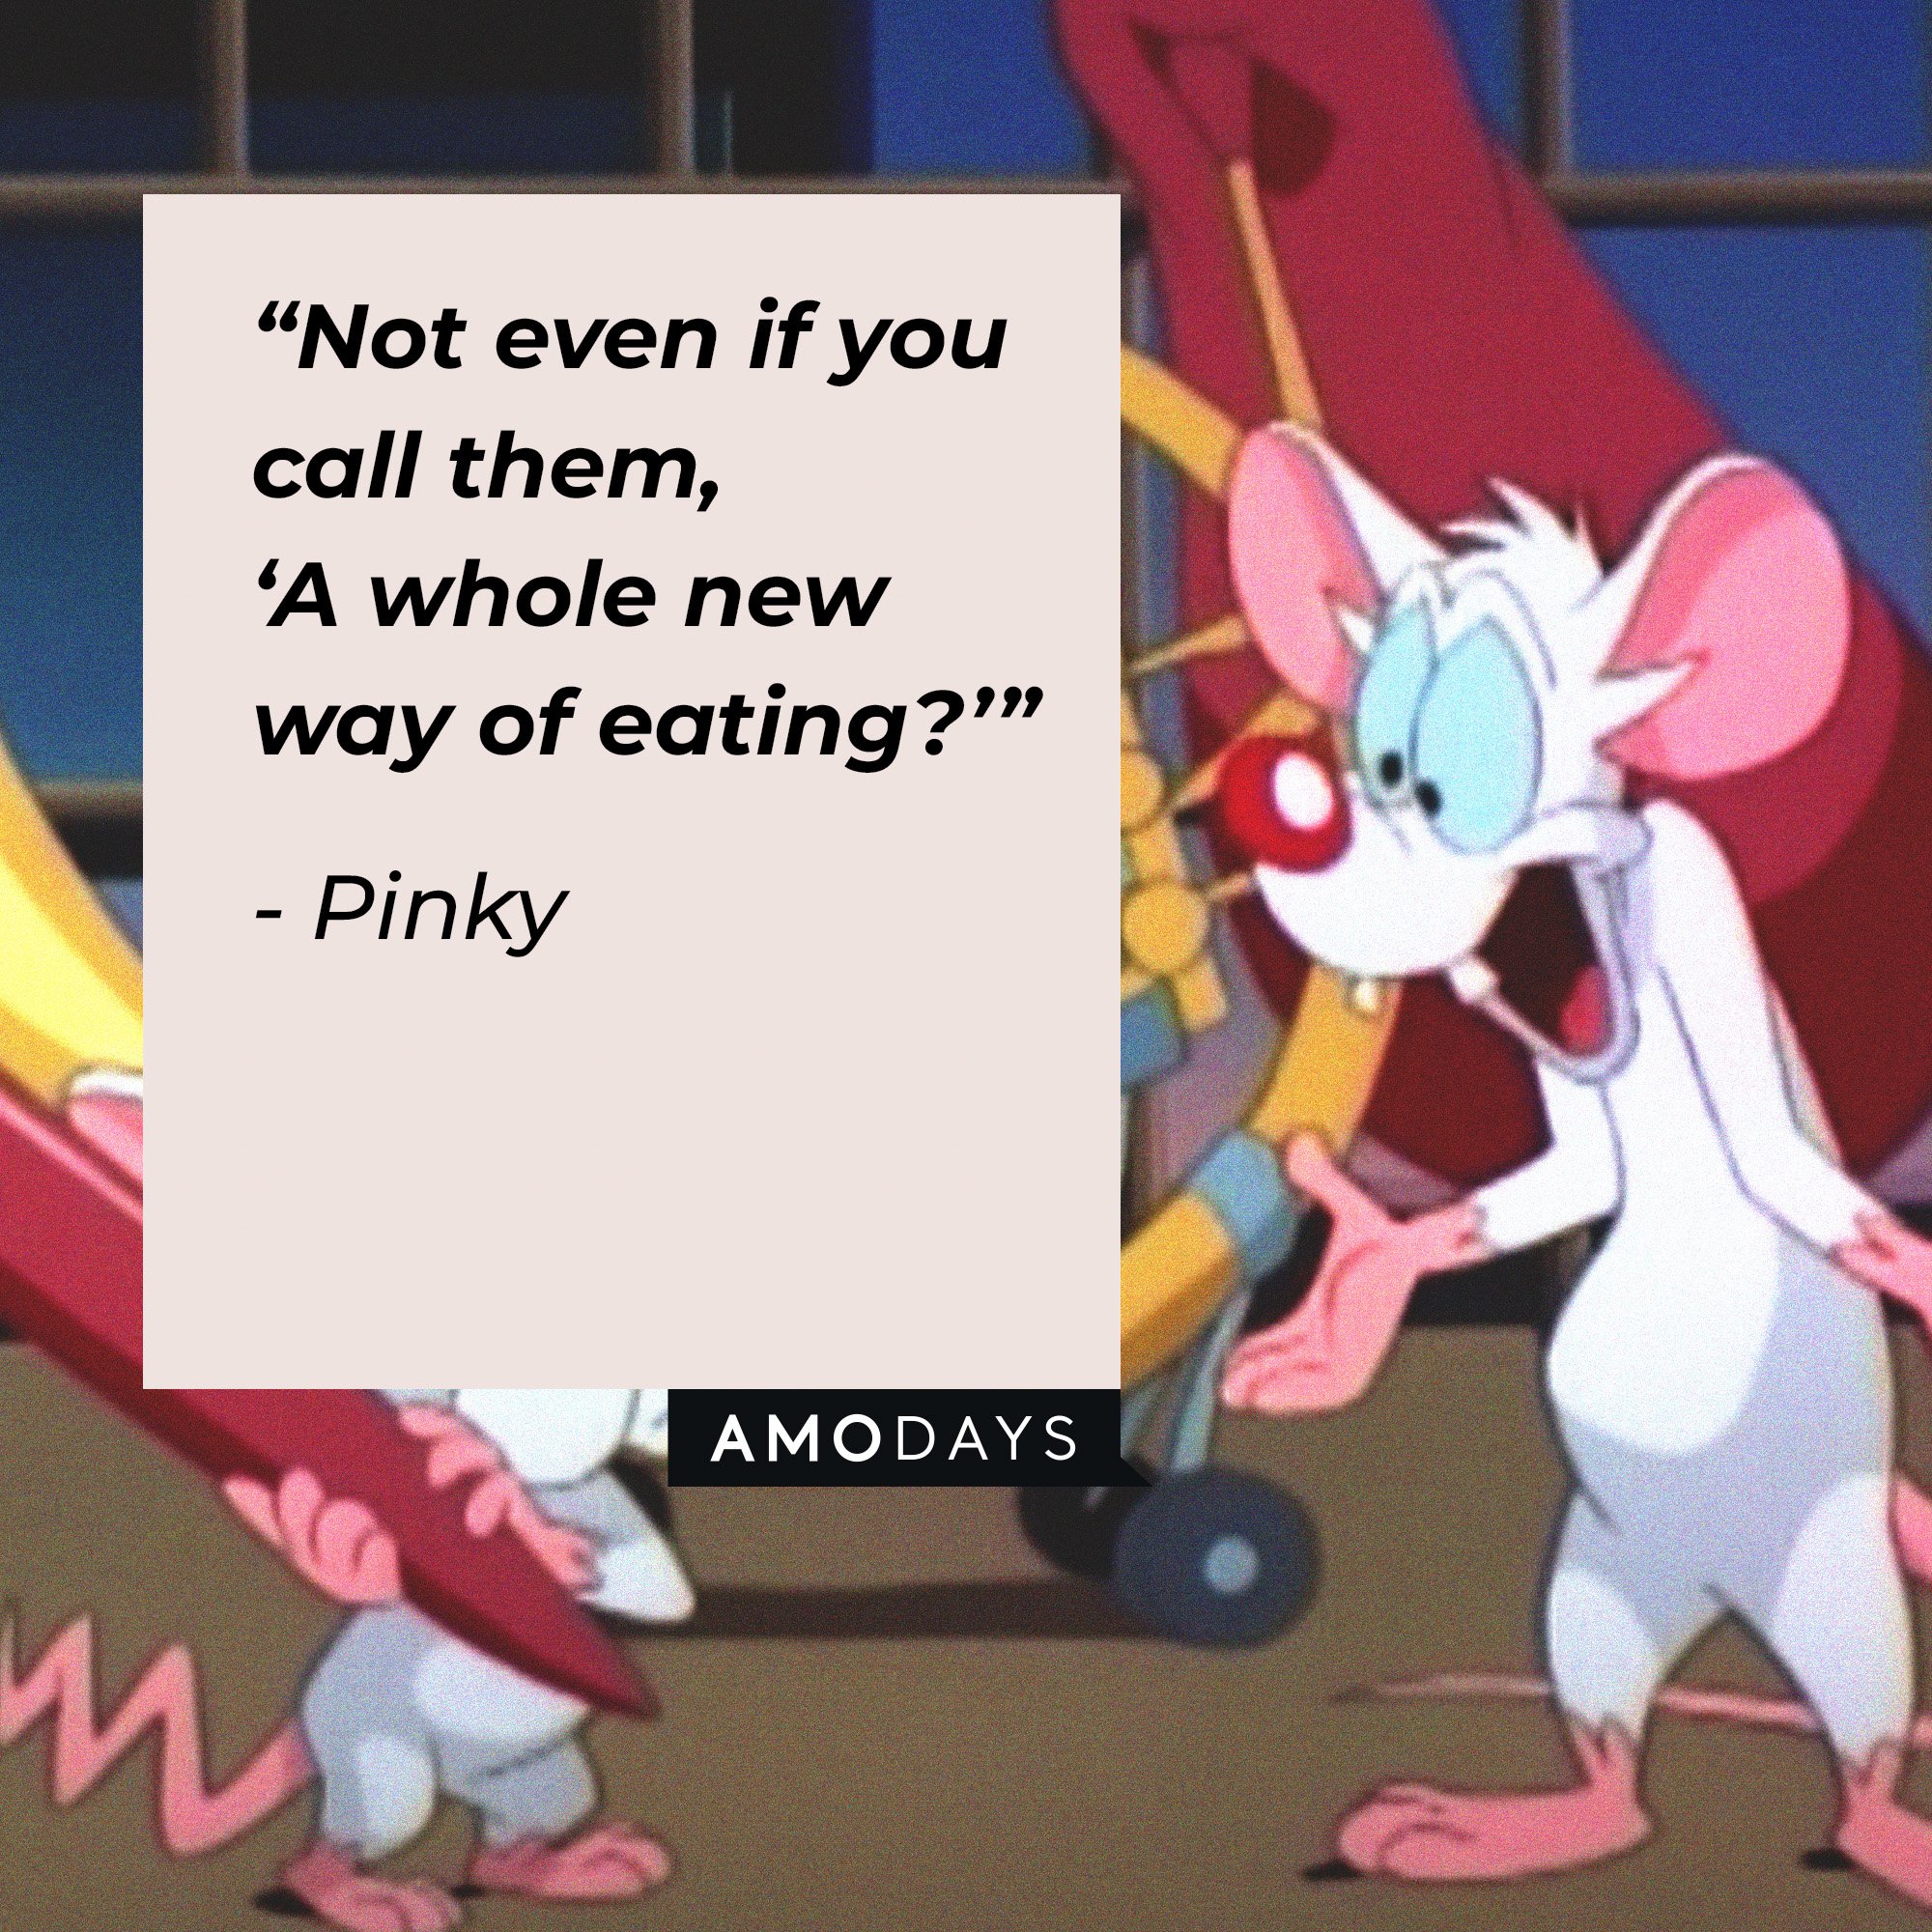  Pinky's quote: “Not even if you call them, ‘A whole new way of eating?’” | Image: AmoDays 